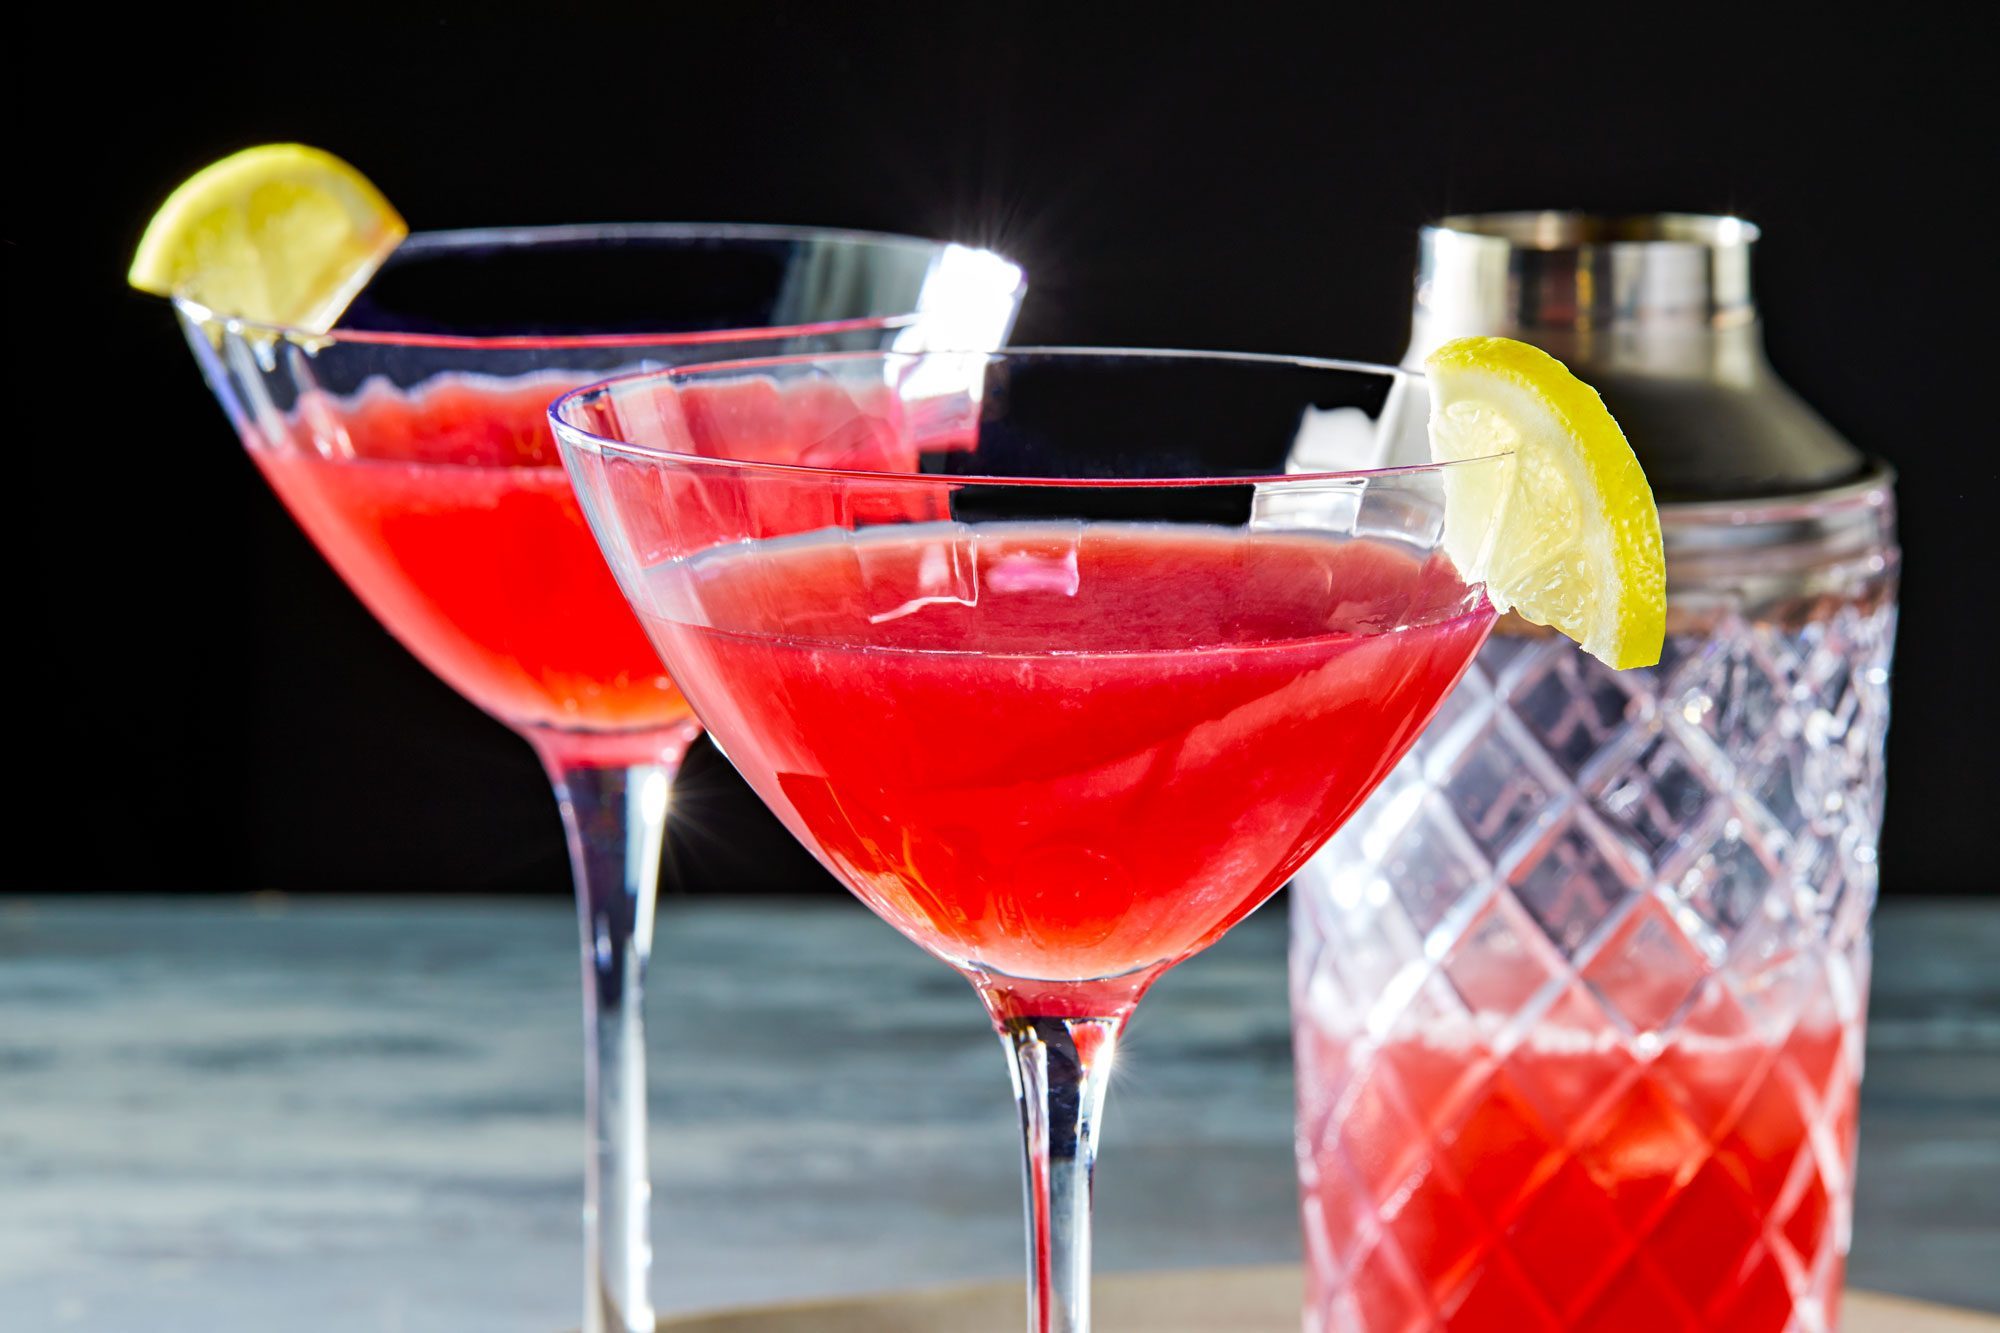 Two glasses of red Pomegranate Martini with a lemon wedge